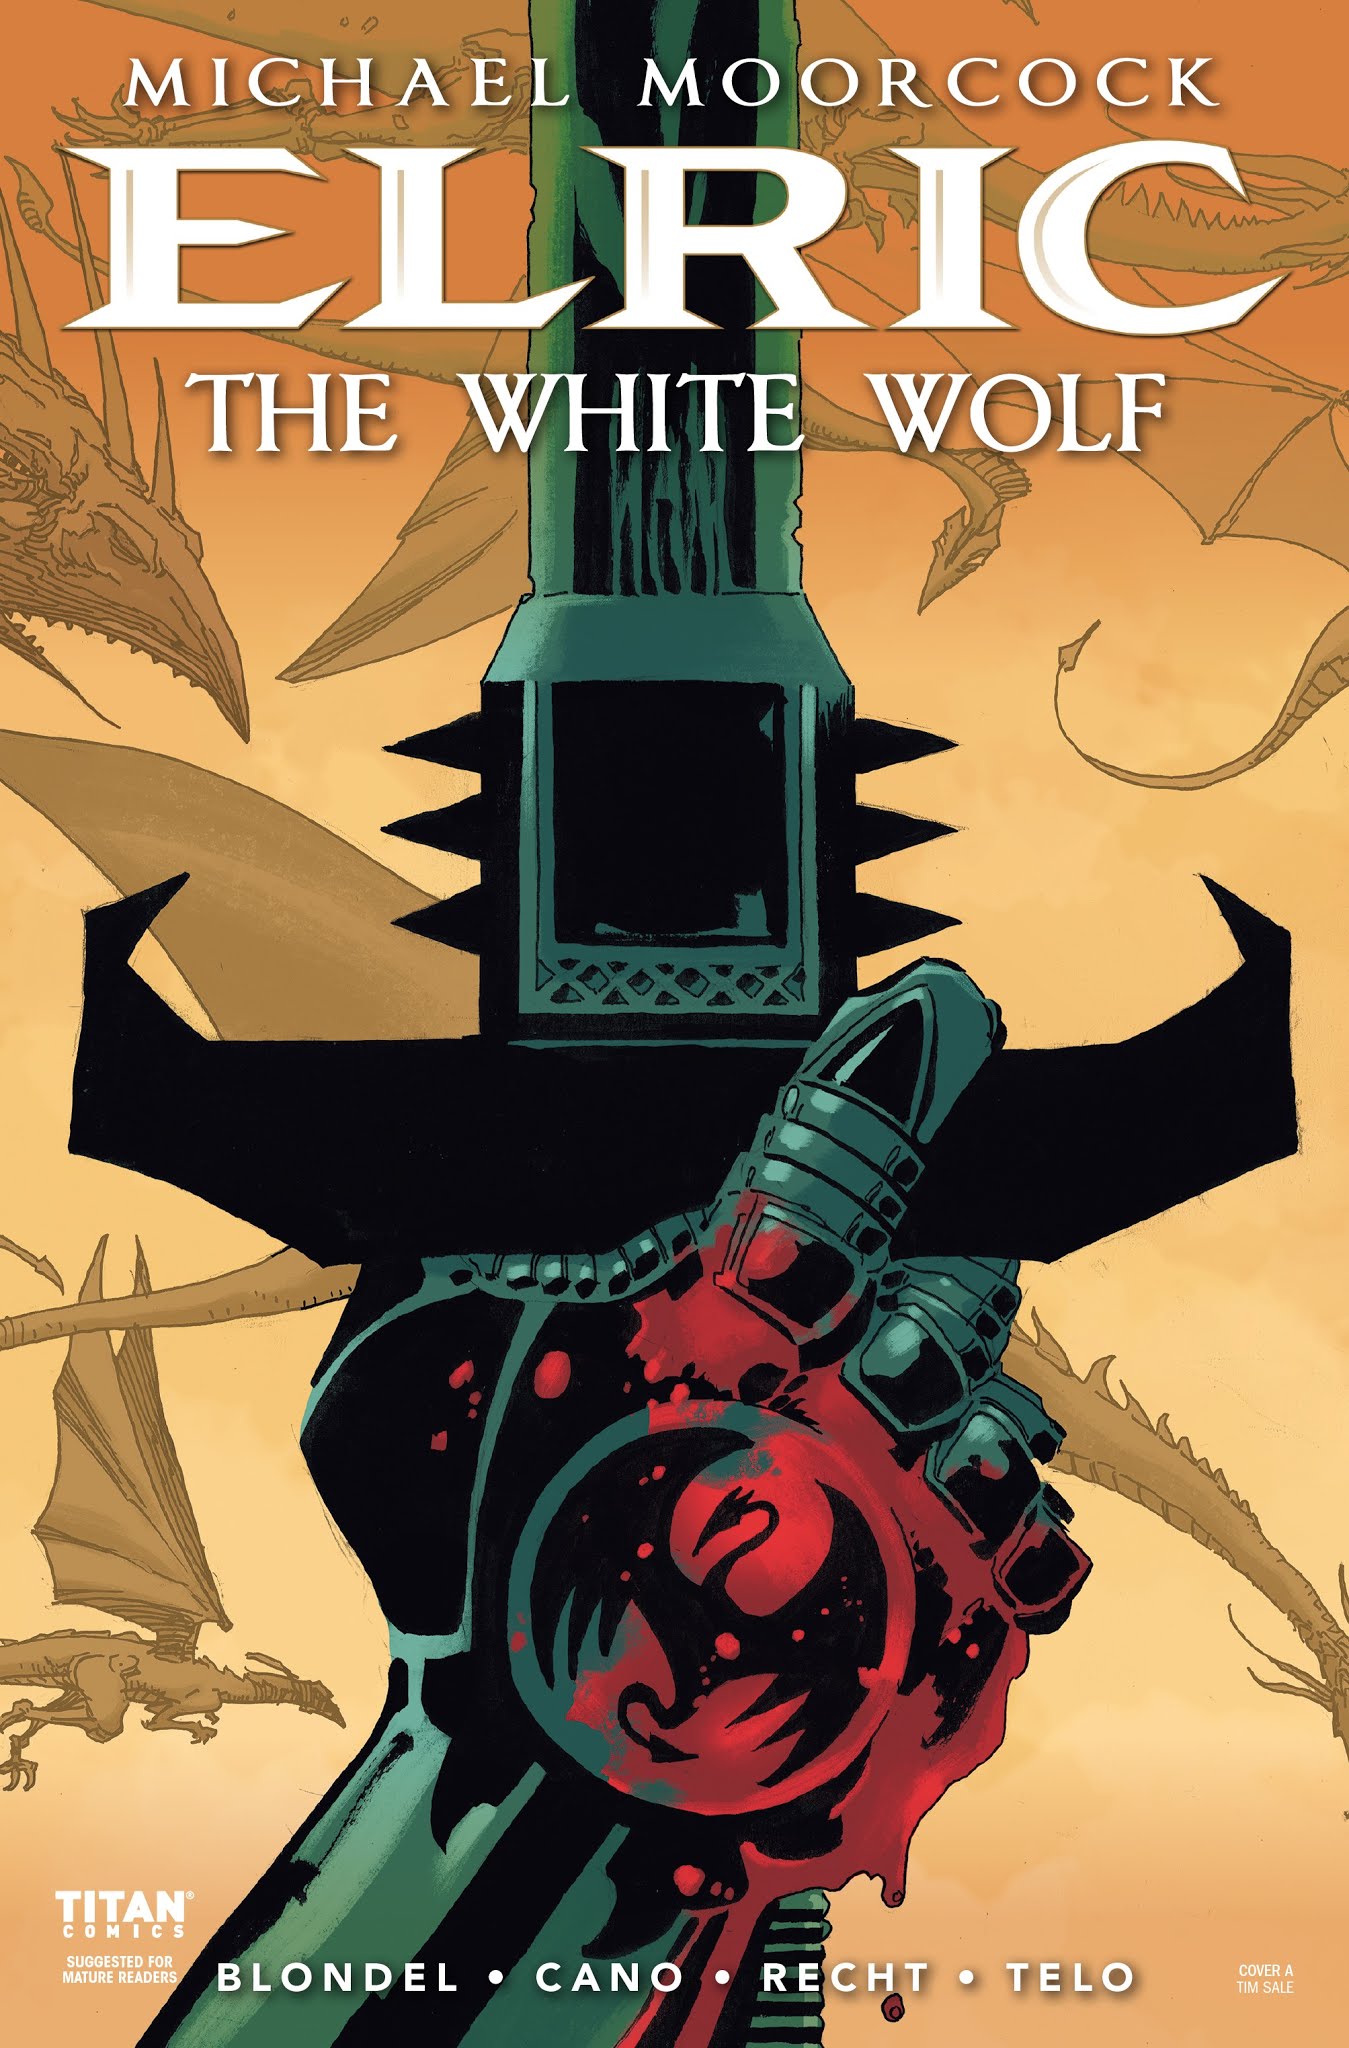 Elric The White Wolf Issue 1 | Read Elric The White Wolf Issue 1 comic  online in high quality. Read Full Comic online for free - Read comics  online in high quality .